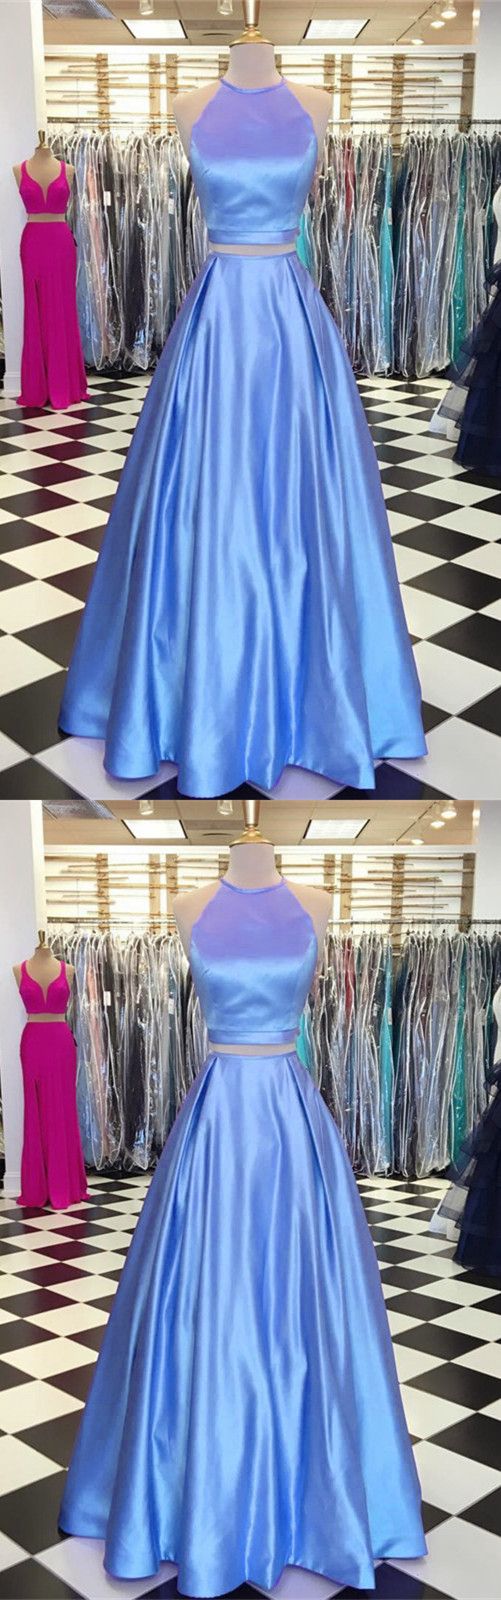 Light Blue Satin Two Piece Prom Dresses With Pocket